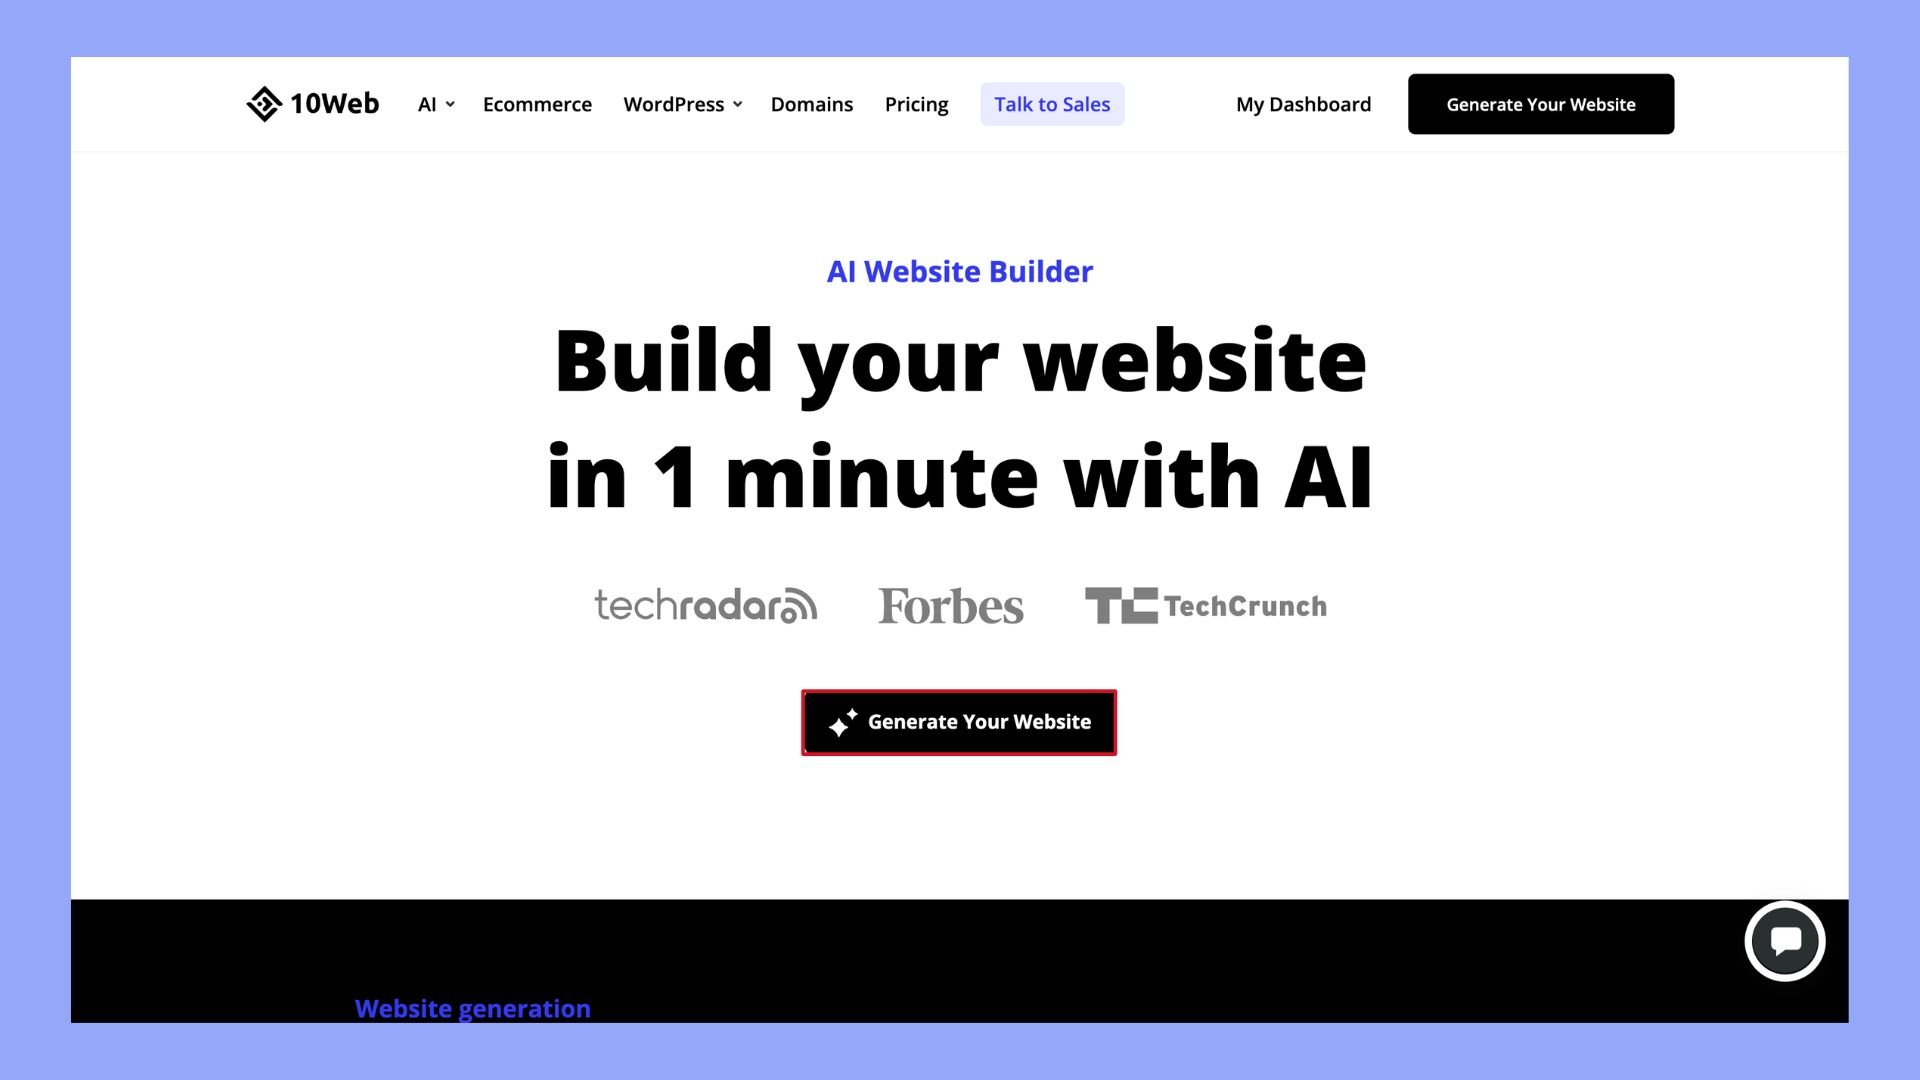 generating a website with 10Web